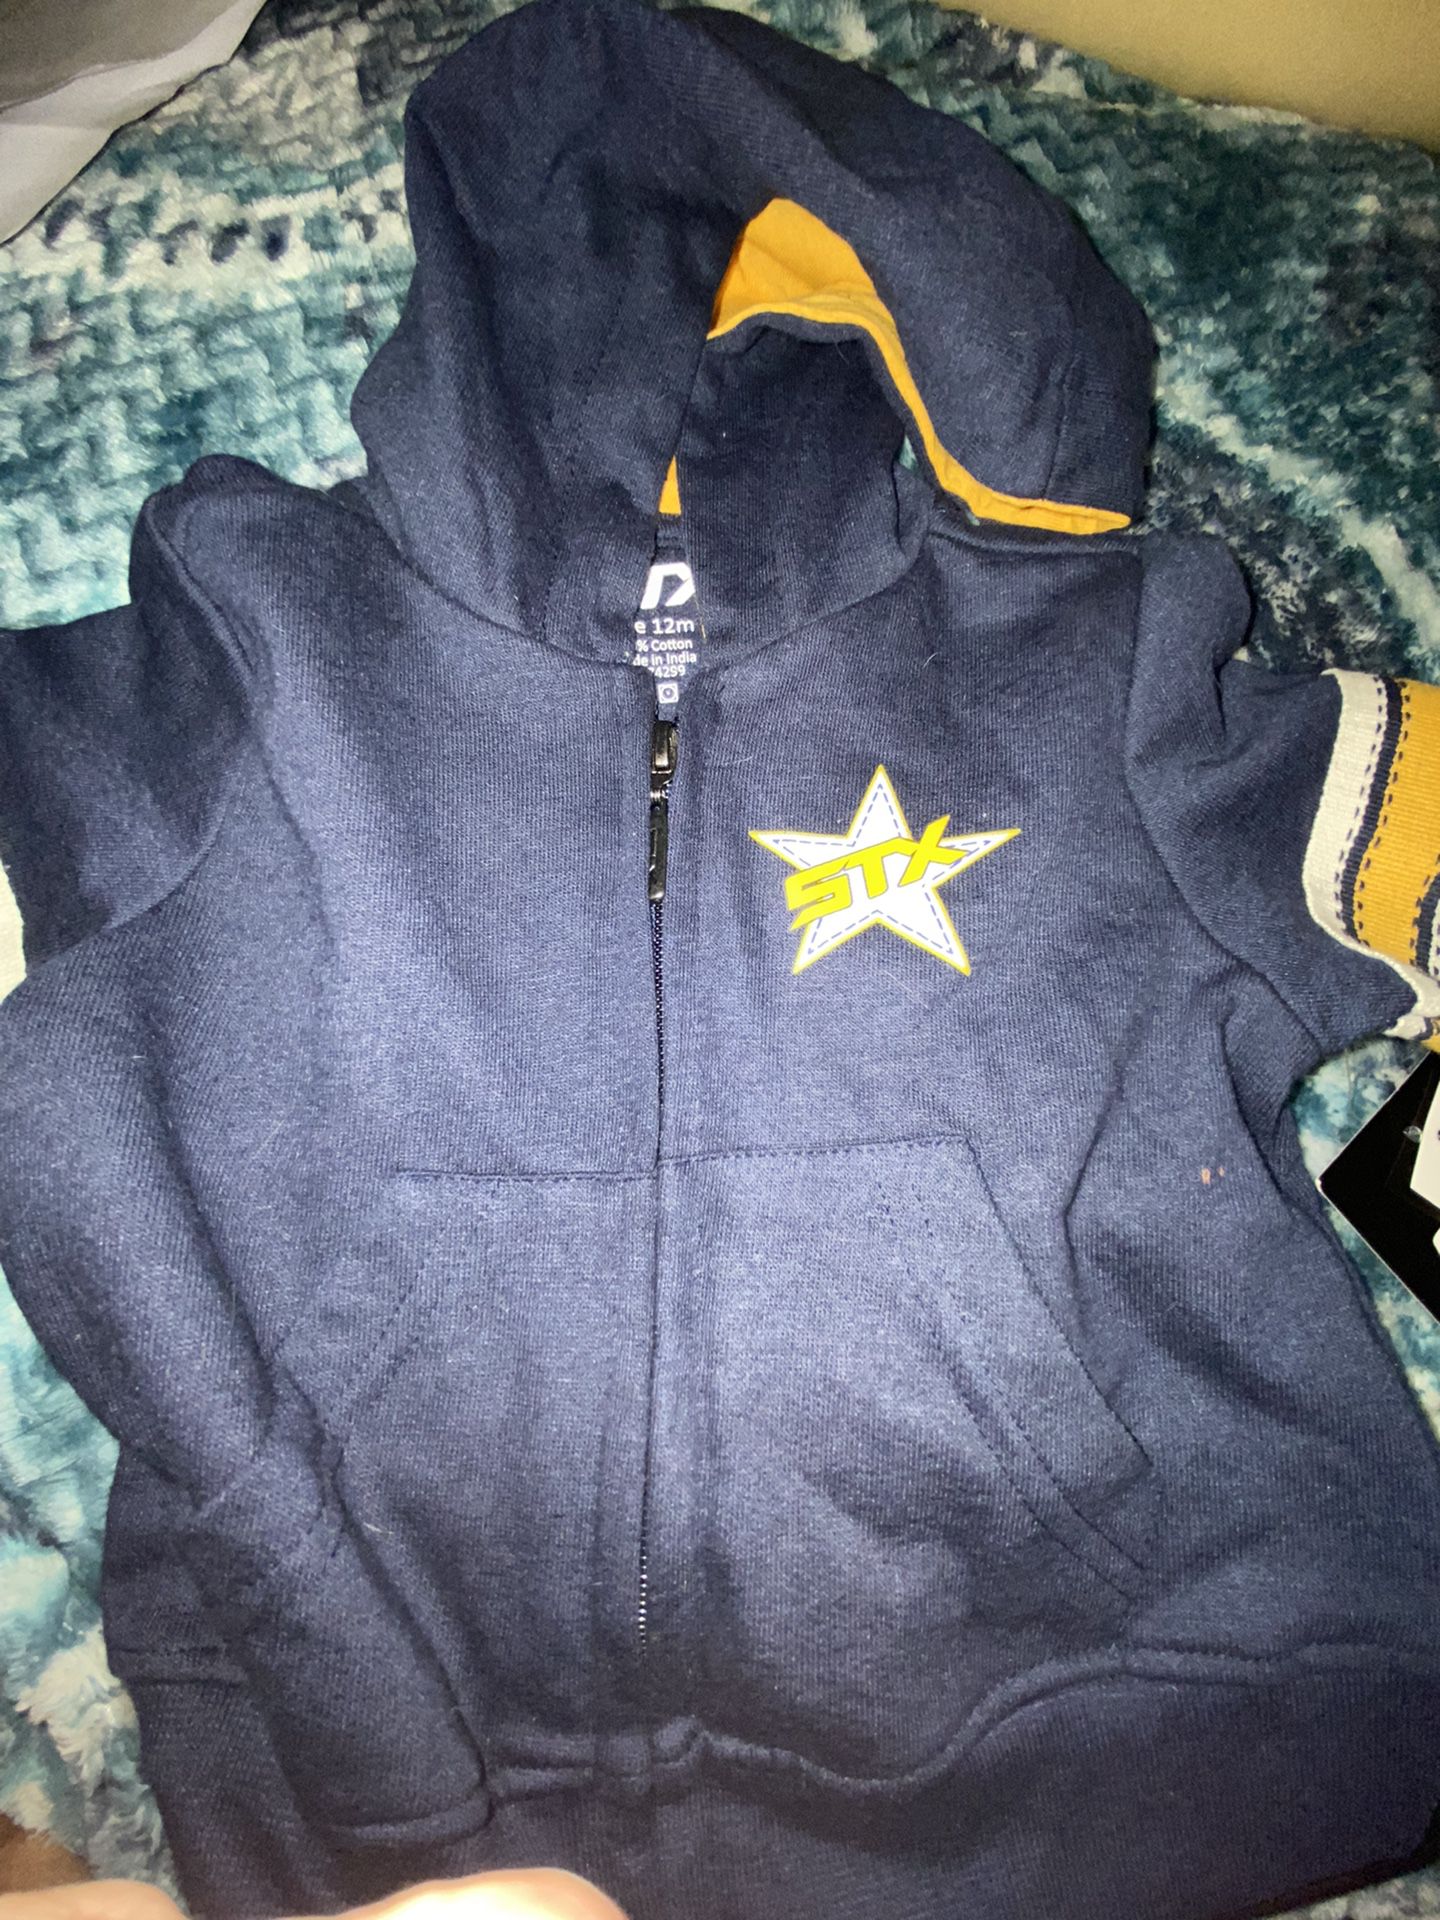 Boys Toddler Size 12 Months Hooded Sweat Jacket 